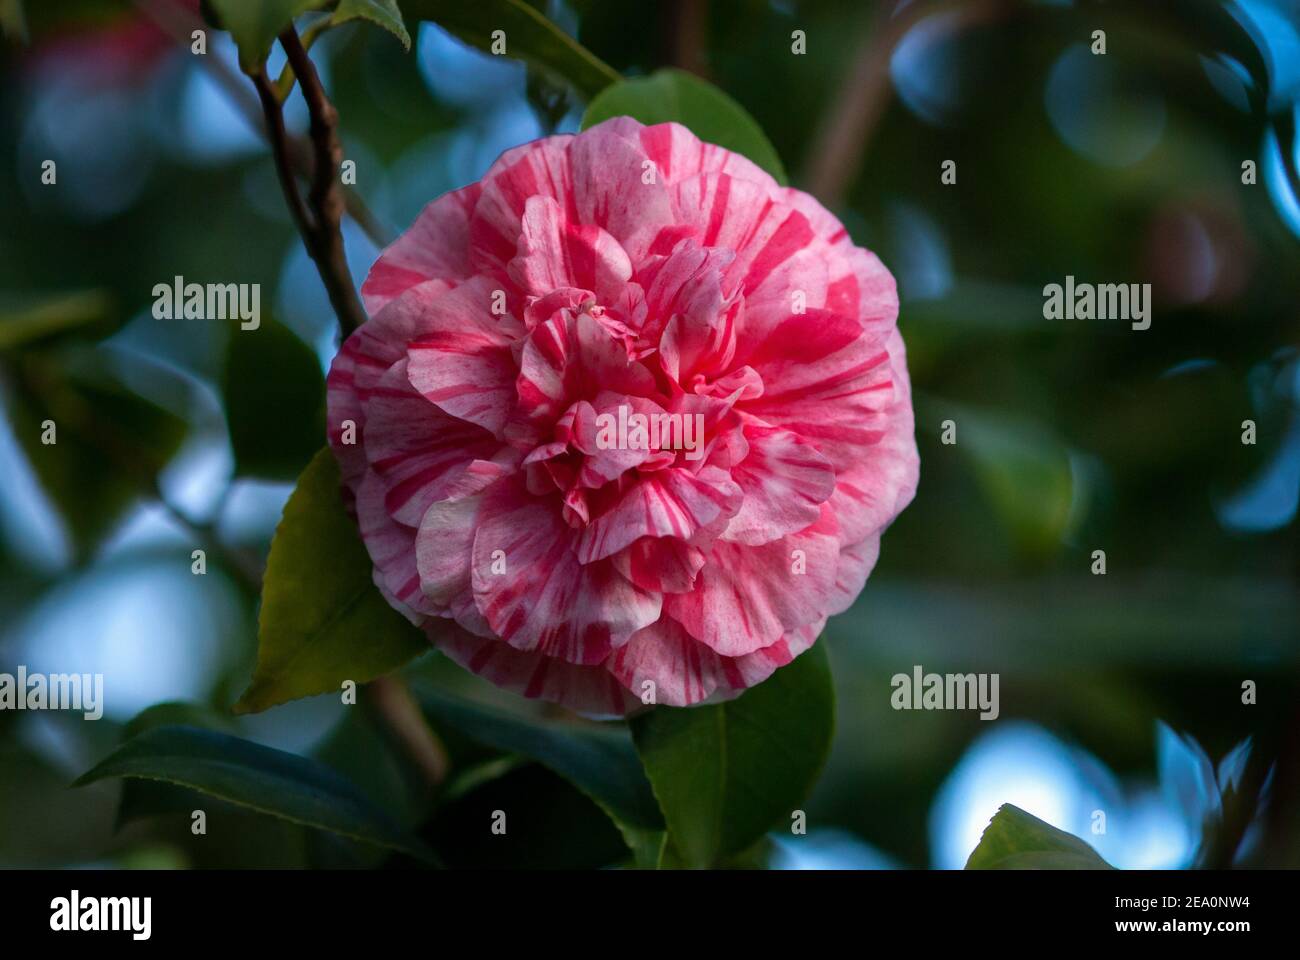 Camellia flower - peony form informal double flower with stripes and spots Stock Photo